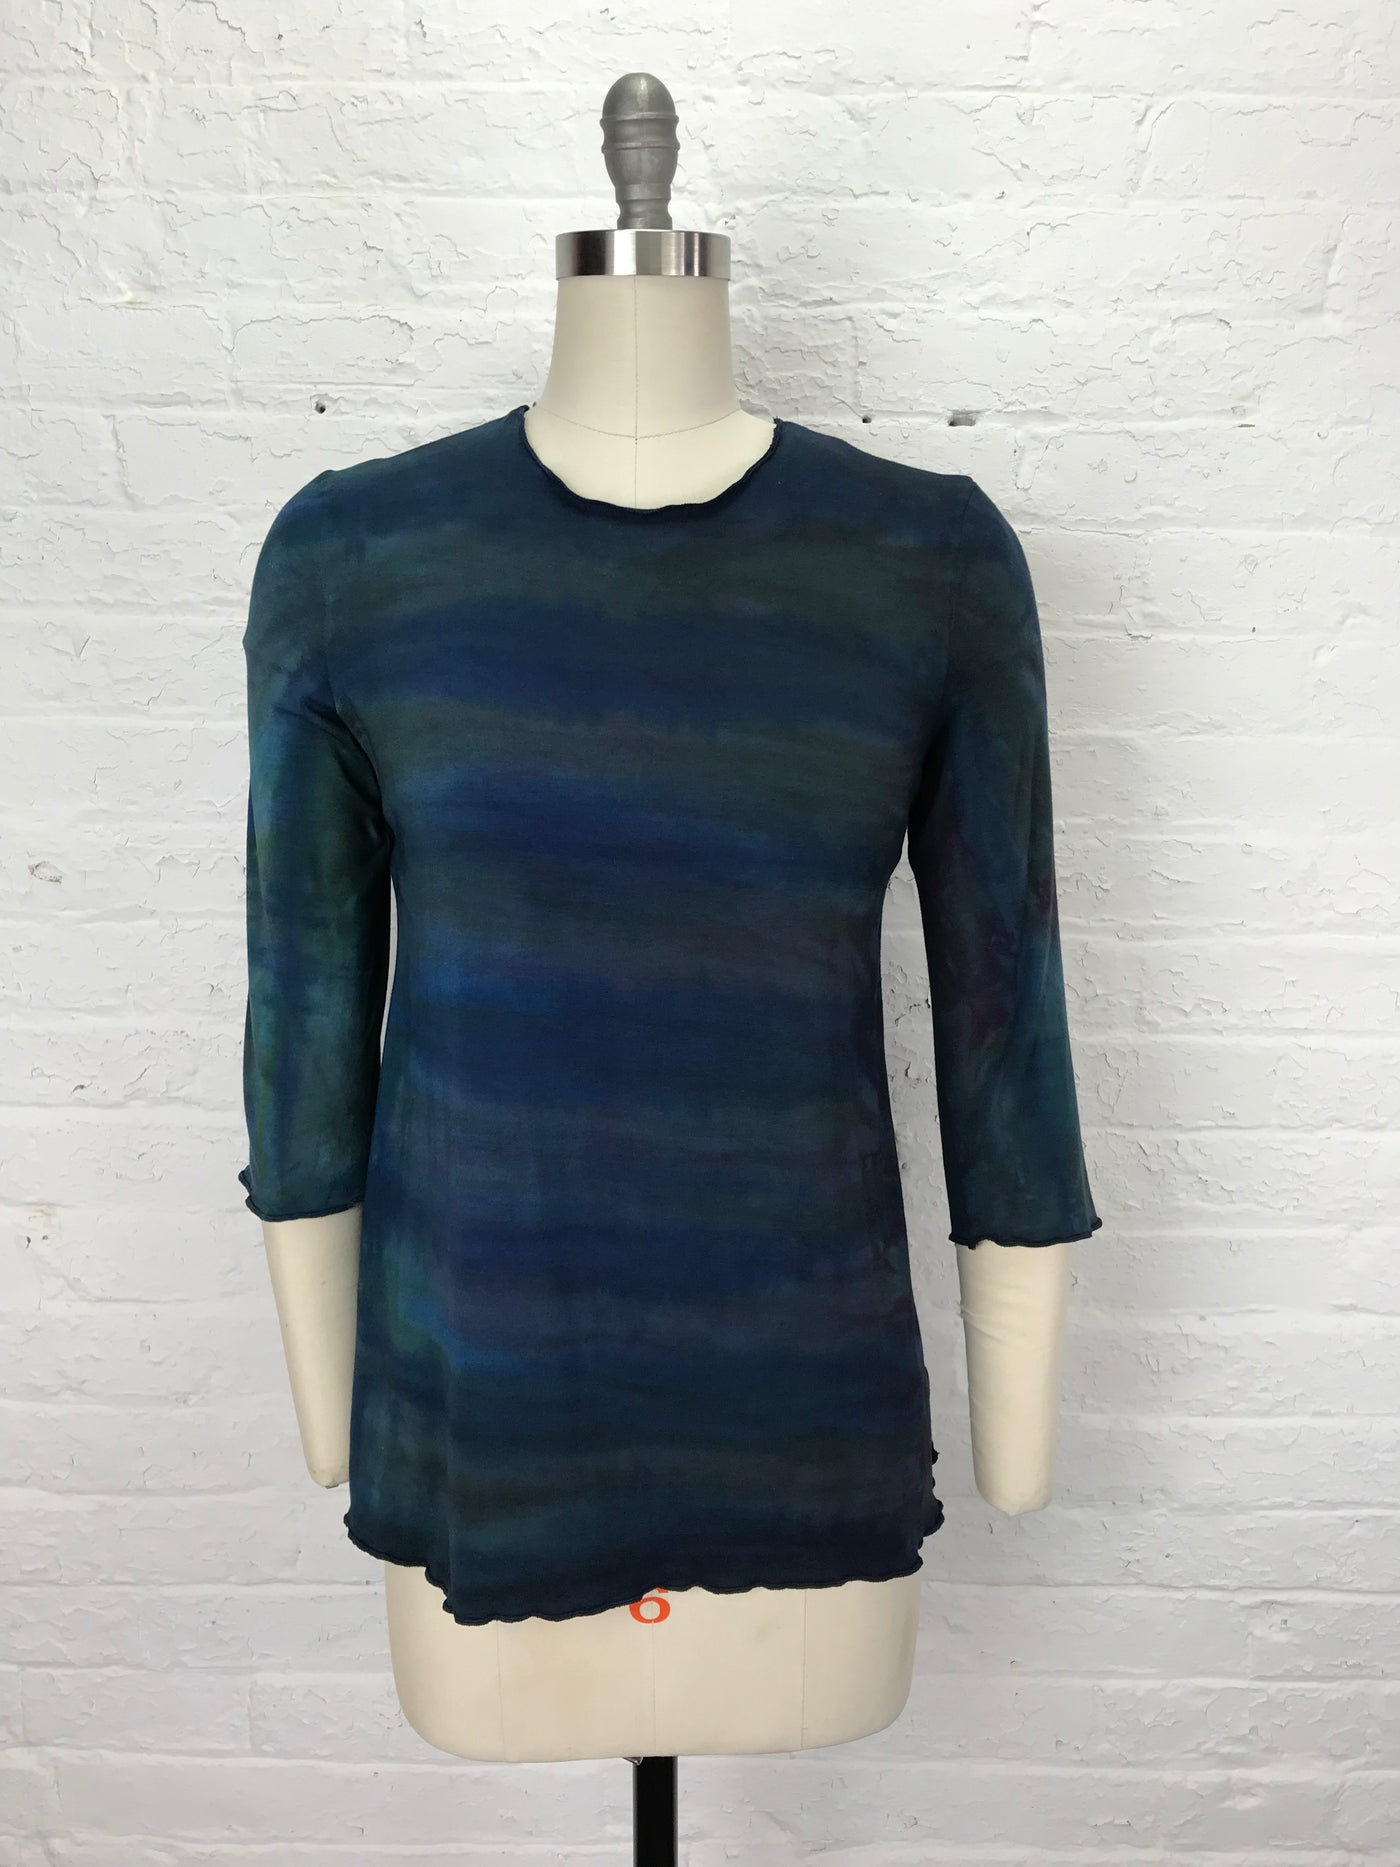 Jane 3/4 Top in Deep Blues and Greens